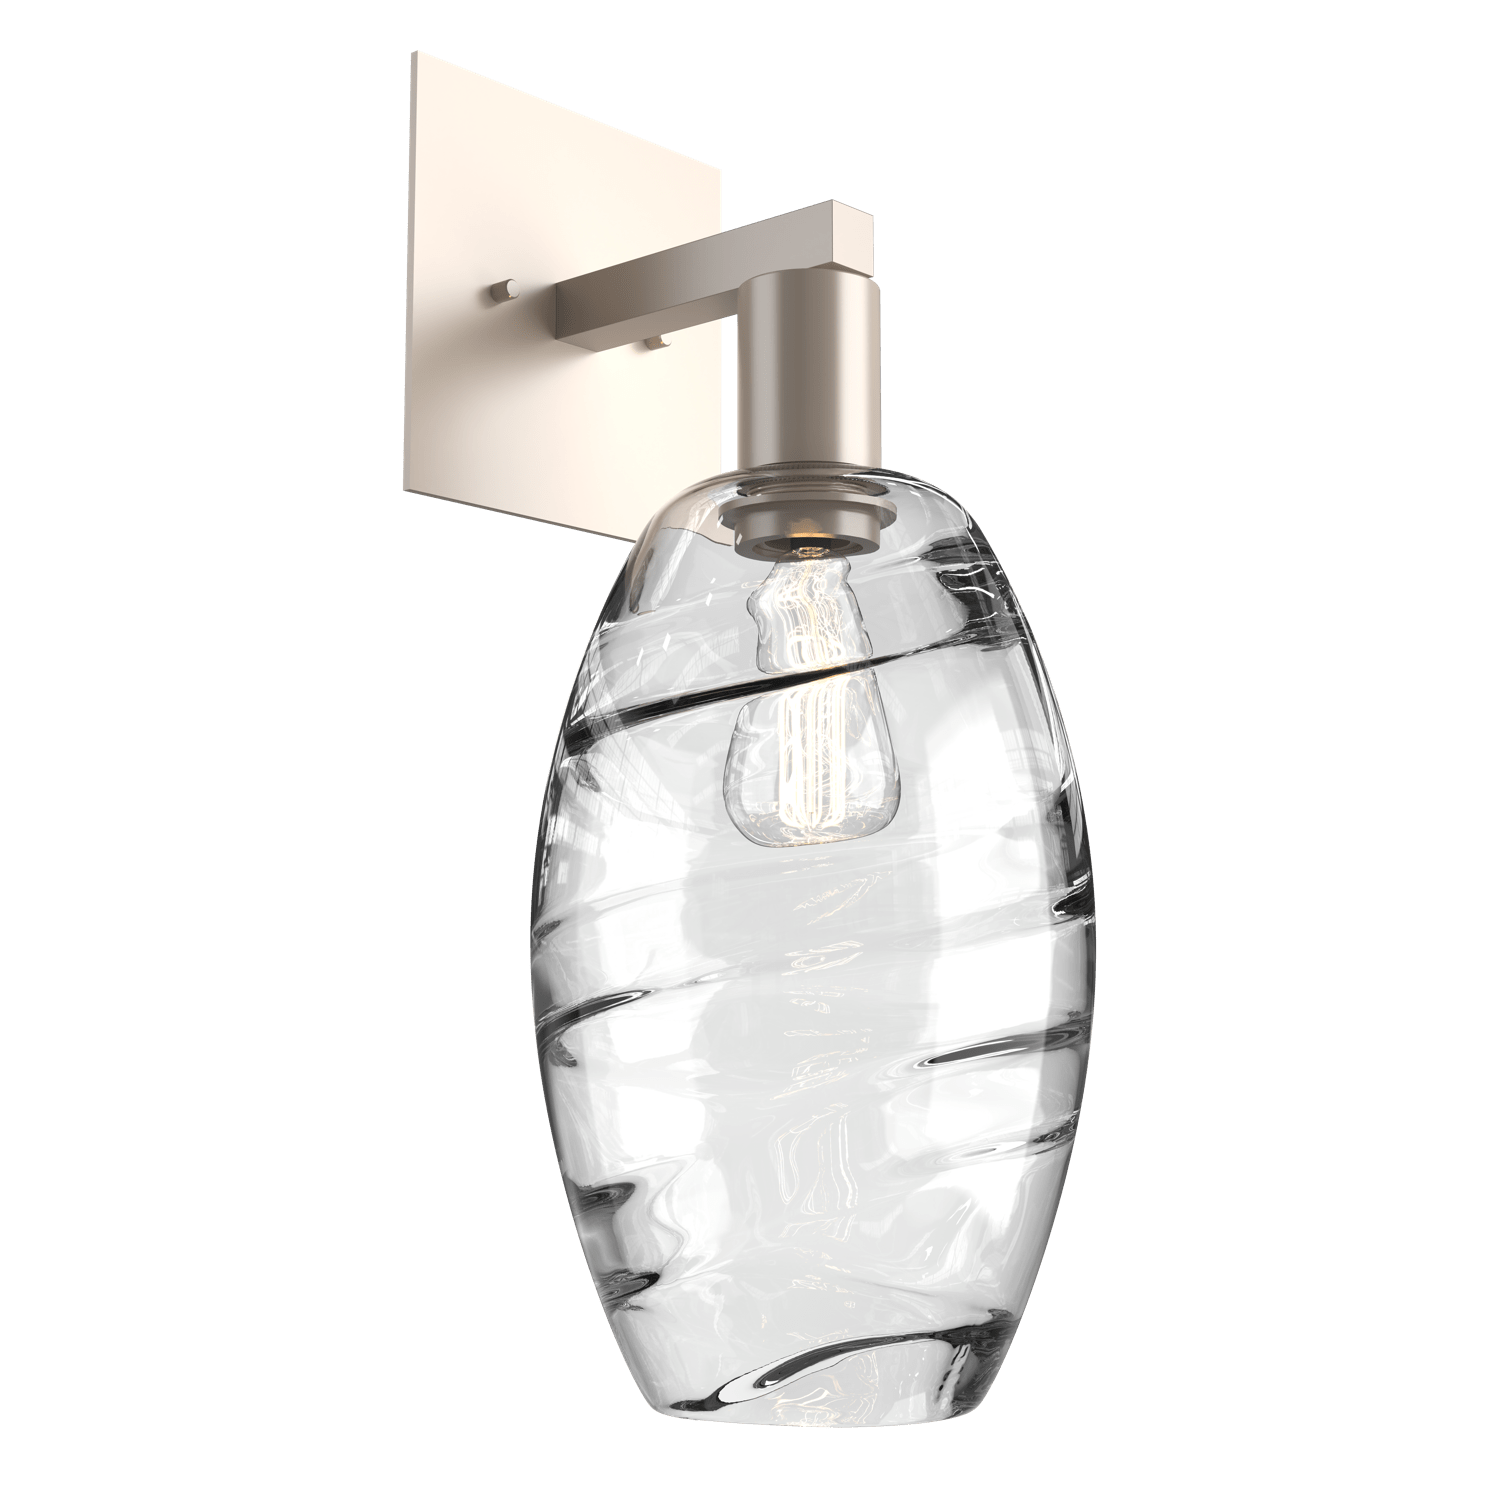 IDB0035-16-BS-OC-Hammerton-Studio-Optic-Blown-Glass-Elisse-wall-sconce-with-metallic-beige-silver-finish-and-optic-clear-blown-glass-shades-and-incandescent-lamping